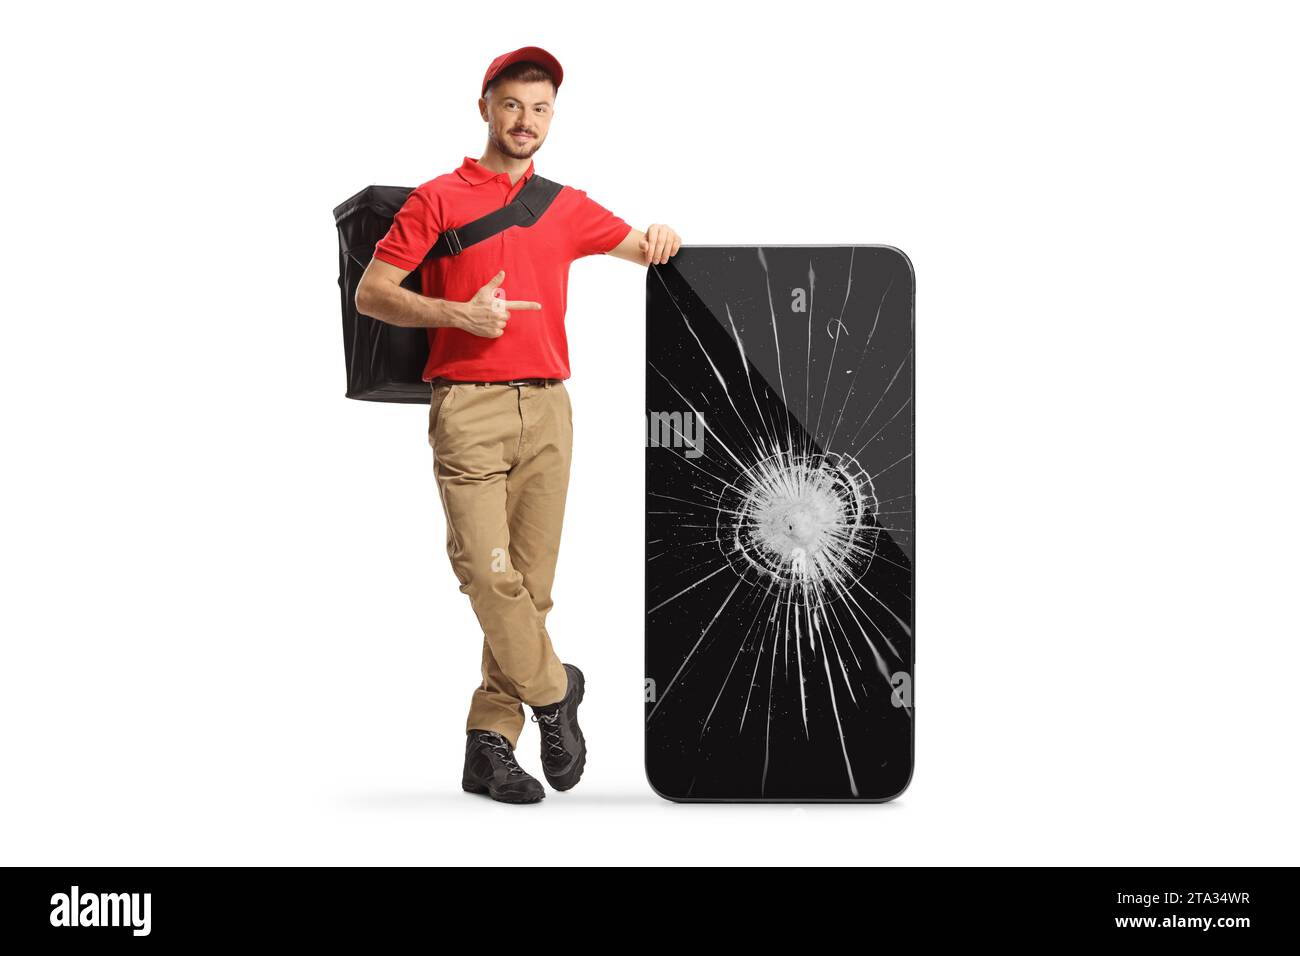 Delivery man leaning on a smartphone with a broken screen and pointing isolated on white background Stock Photo